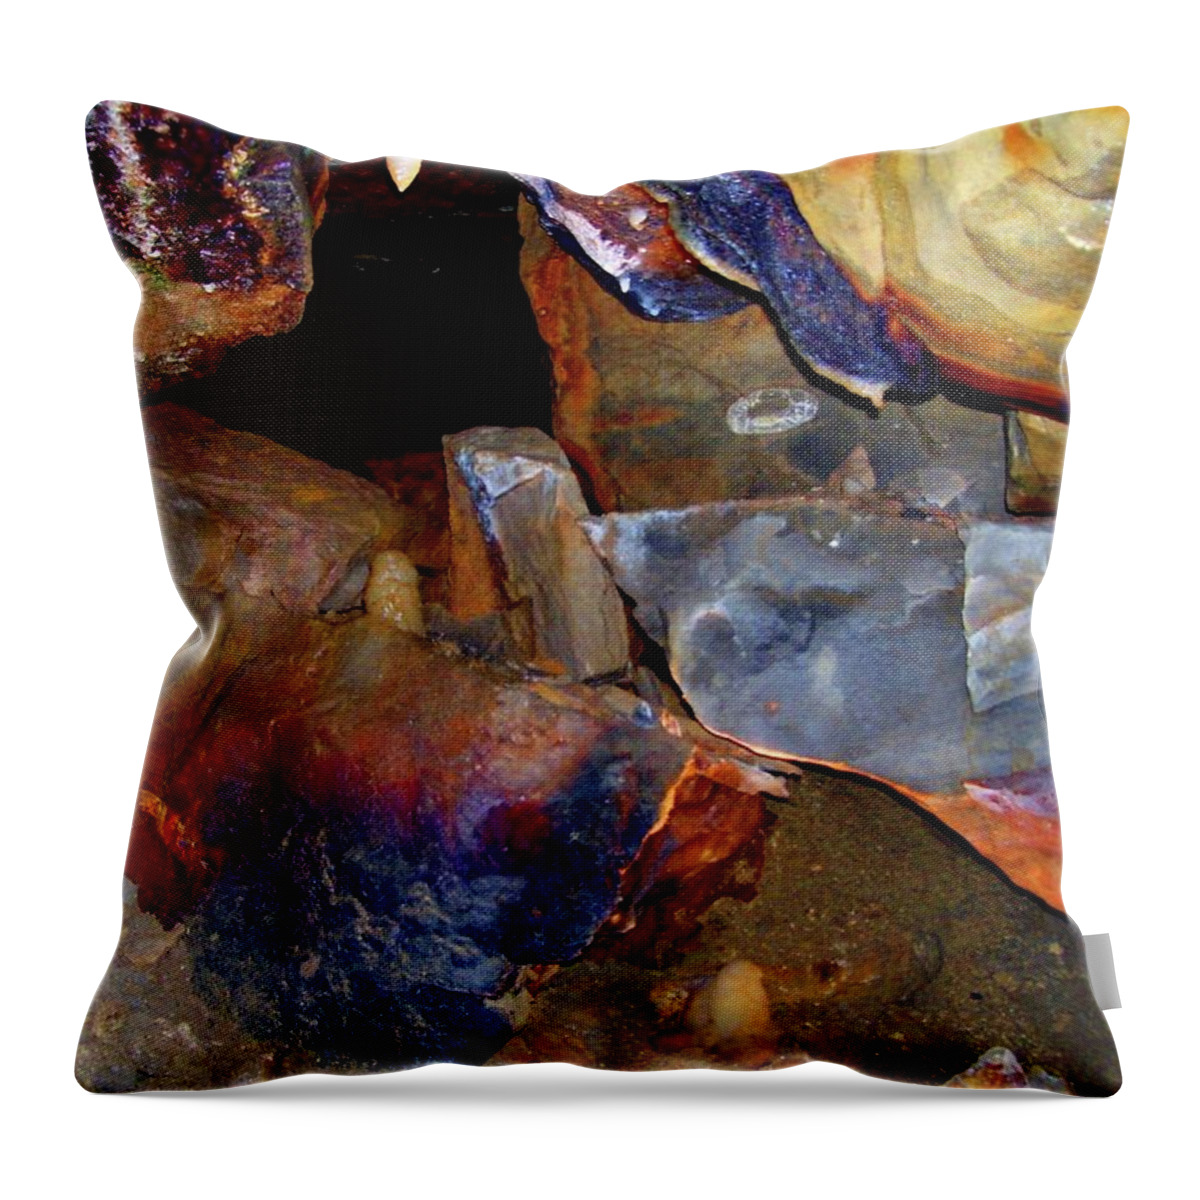 Ohio Caverns Throw Pillow featuring the photograph Cave Gems by Melinda Dare Benfield